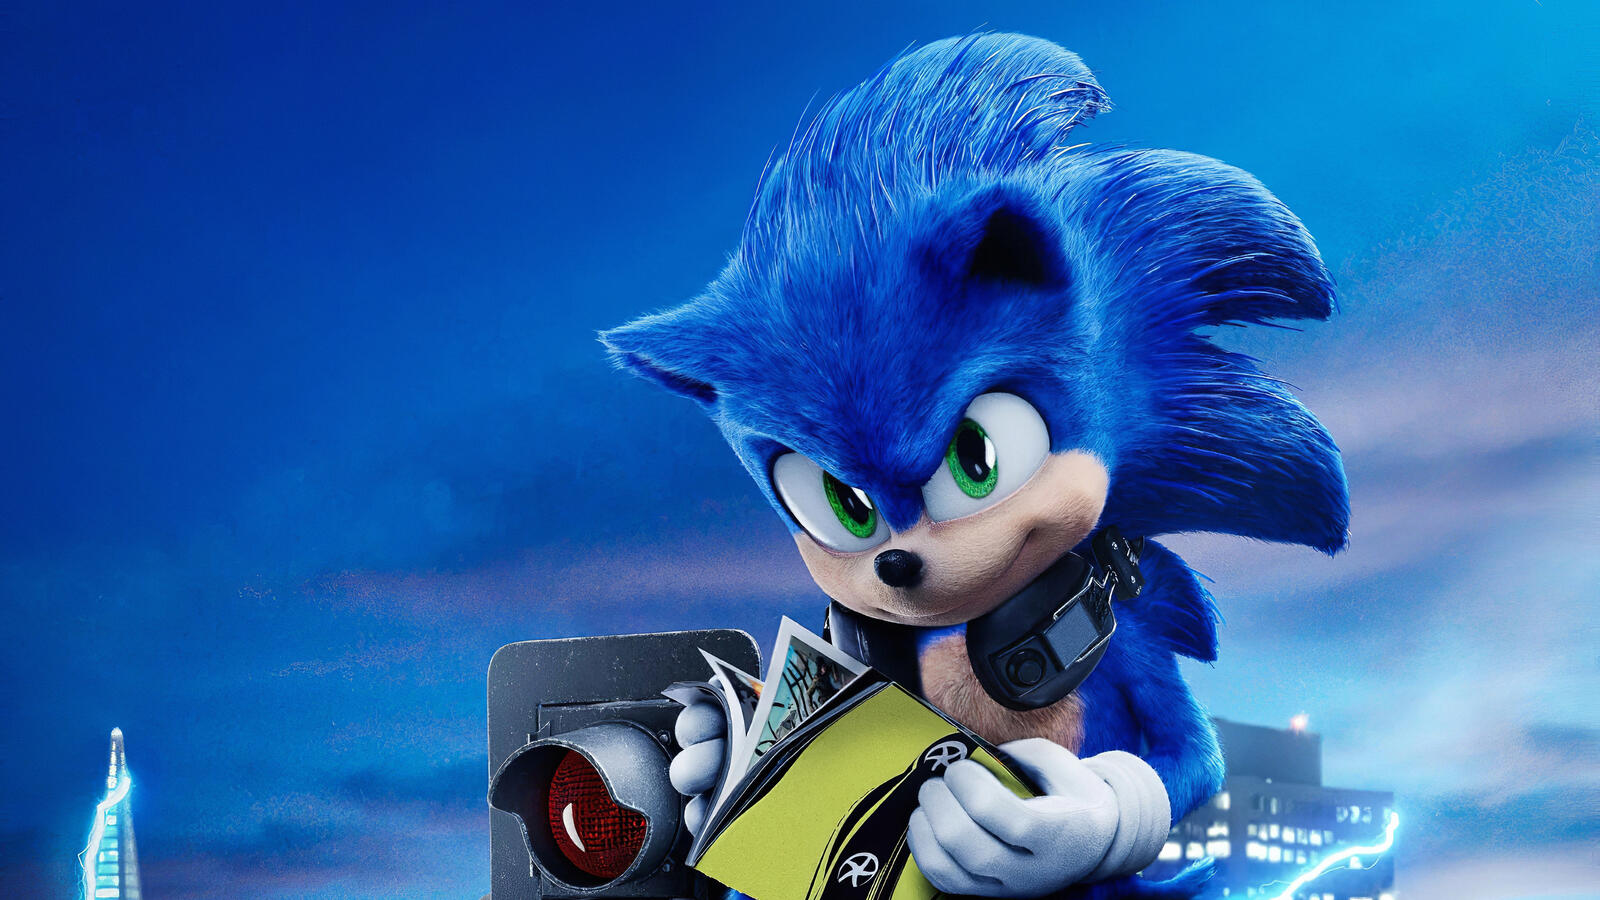 Wallpapers Sonic The Hedgehog Sonic movies on the desktop